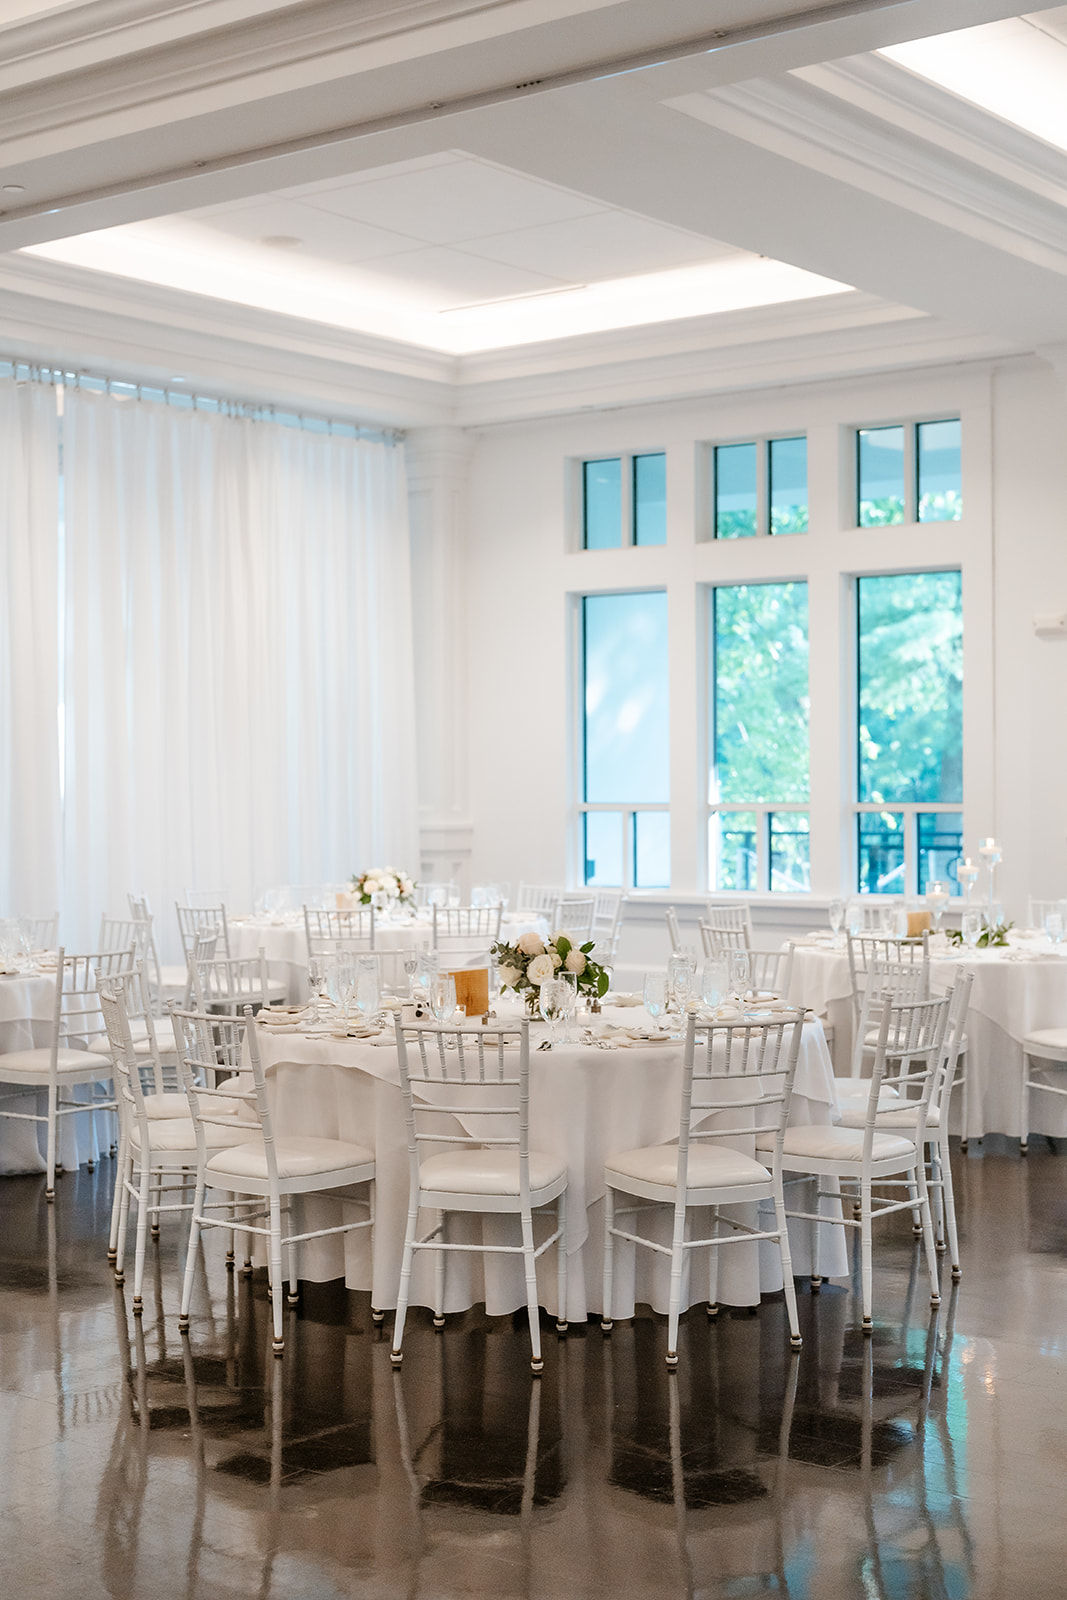 An elegantly set event space with round tables dressed in white linens, surrounded by white chairs, and adorned with floral centerpieces, under a bright room with large windows and flowing white curtains.